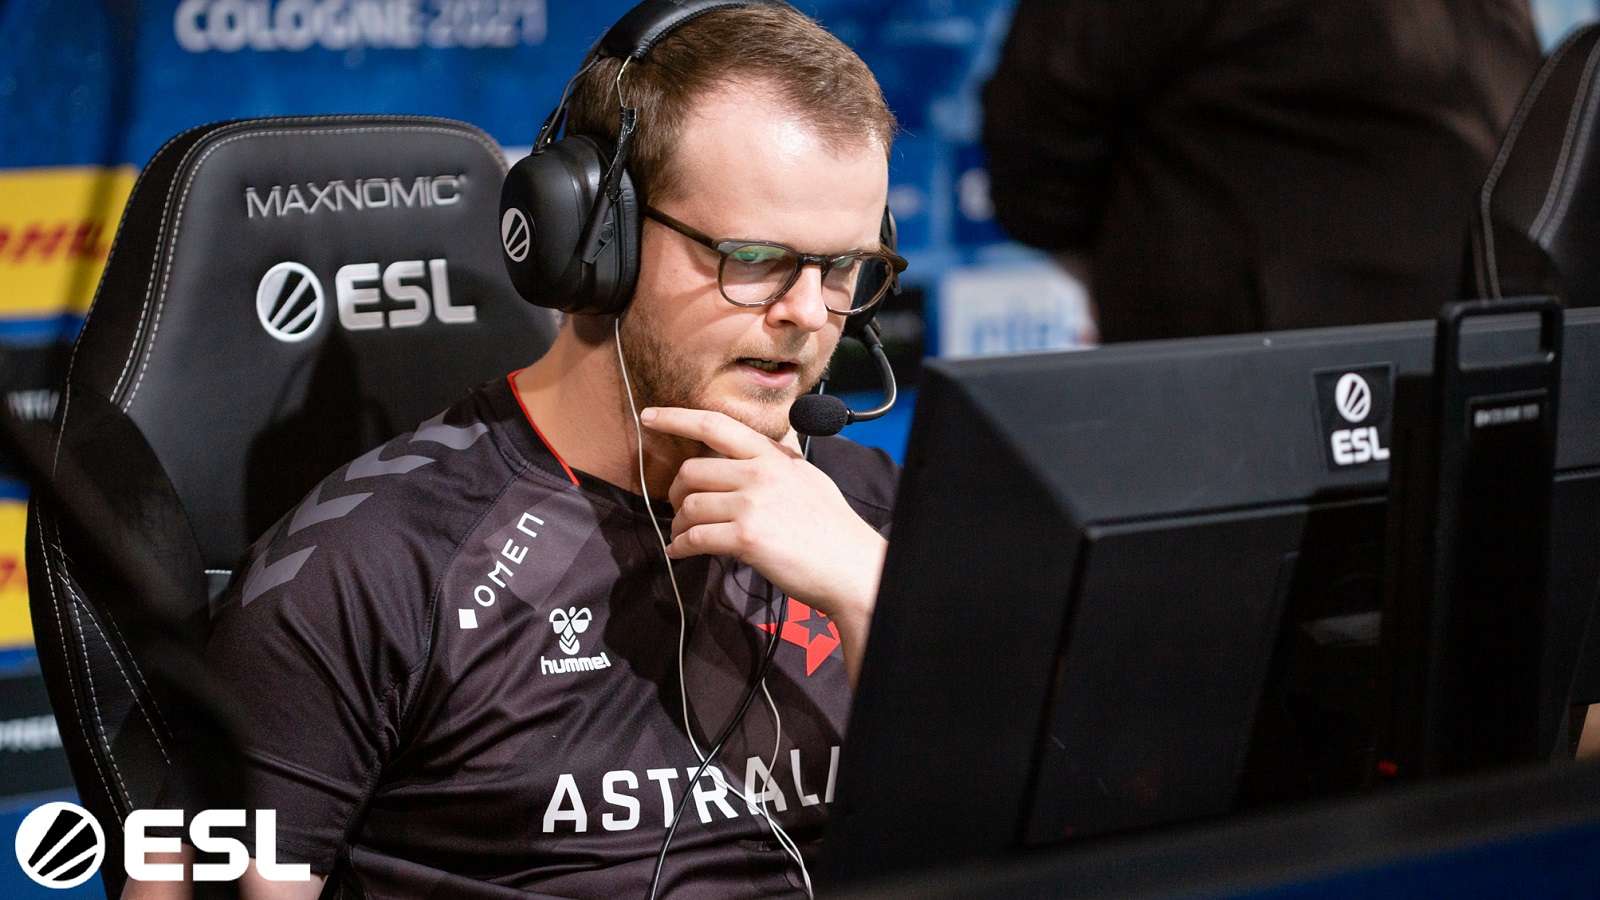 Xyp9x at IEM Cologne 2021